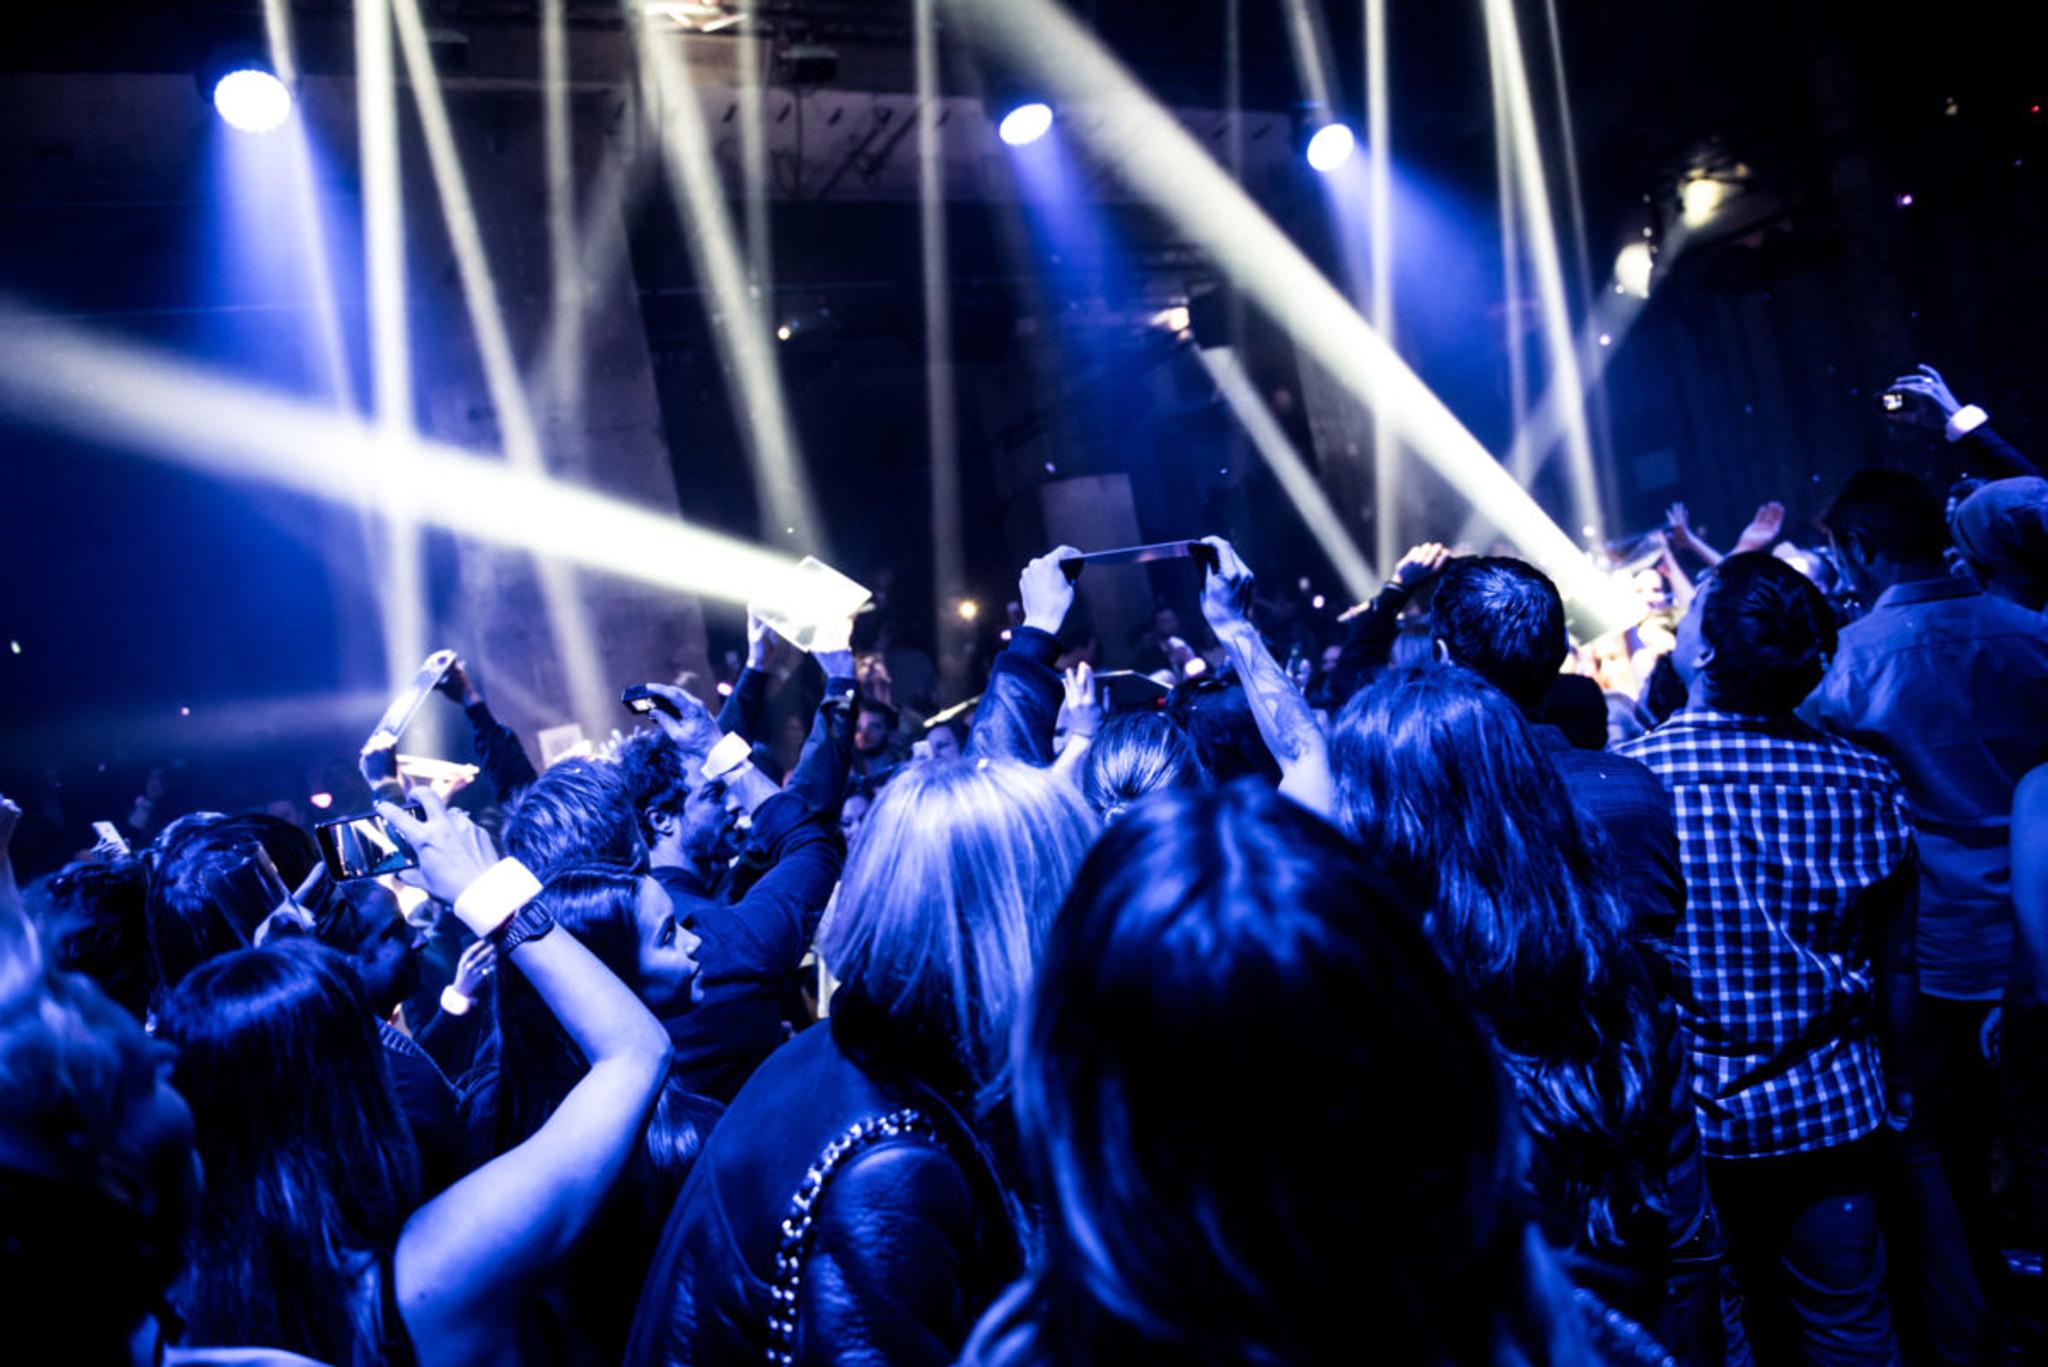 Performers in a crowd in a club environment reflect beams of spotlights from handheld mirrors.